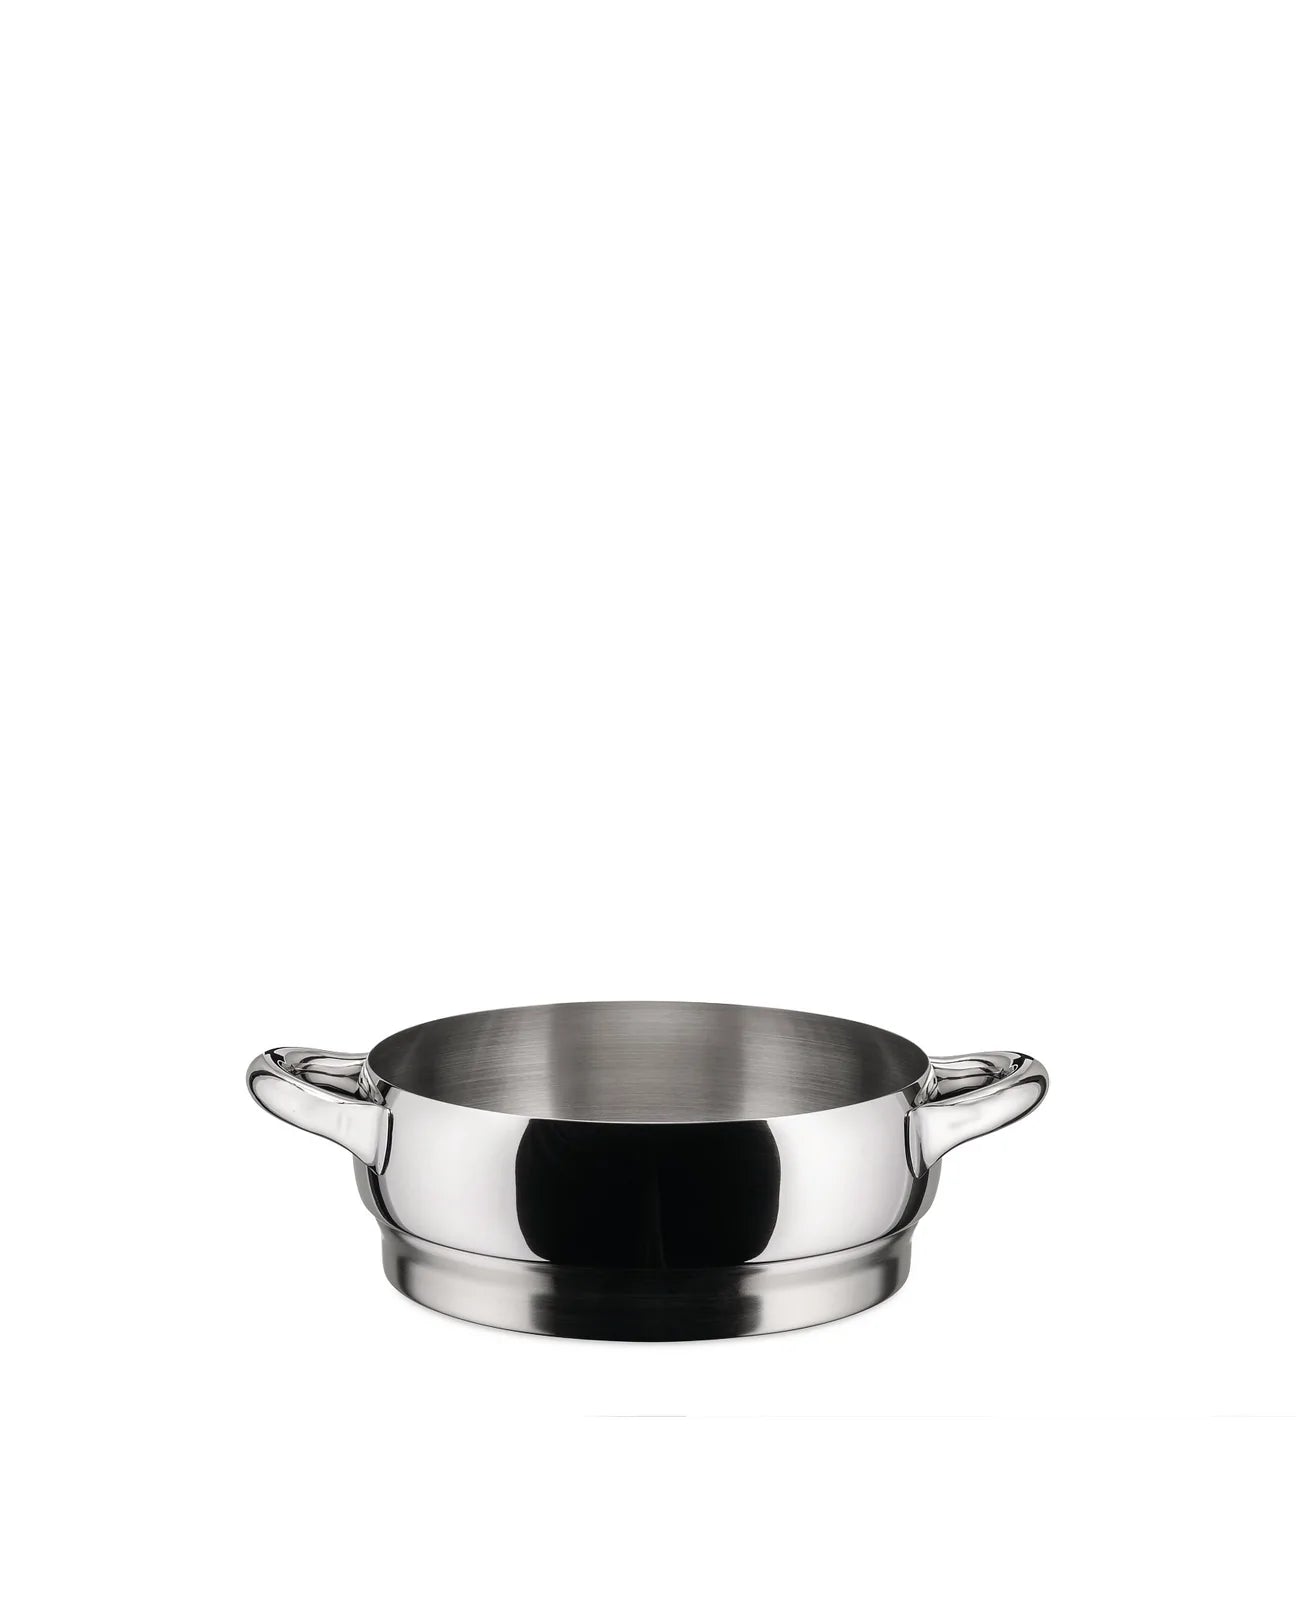 Alessi Mami basket for steam cooking